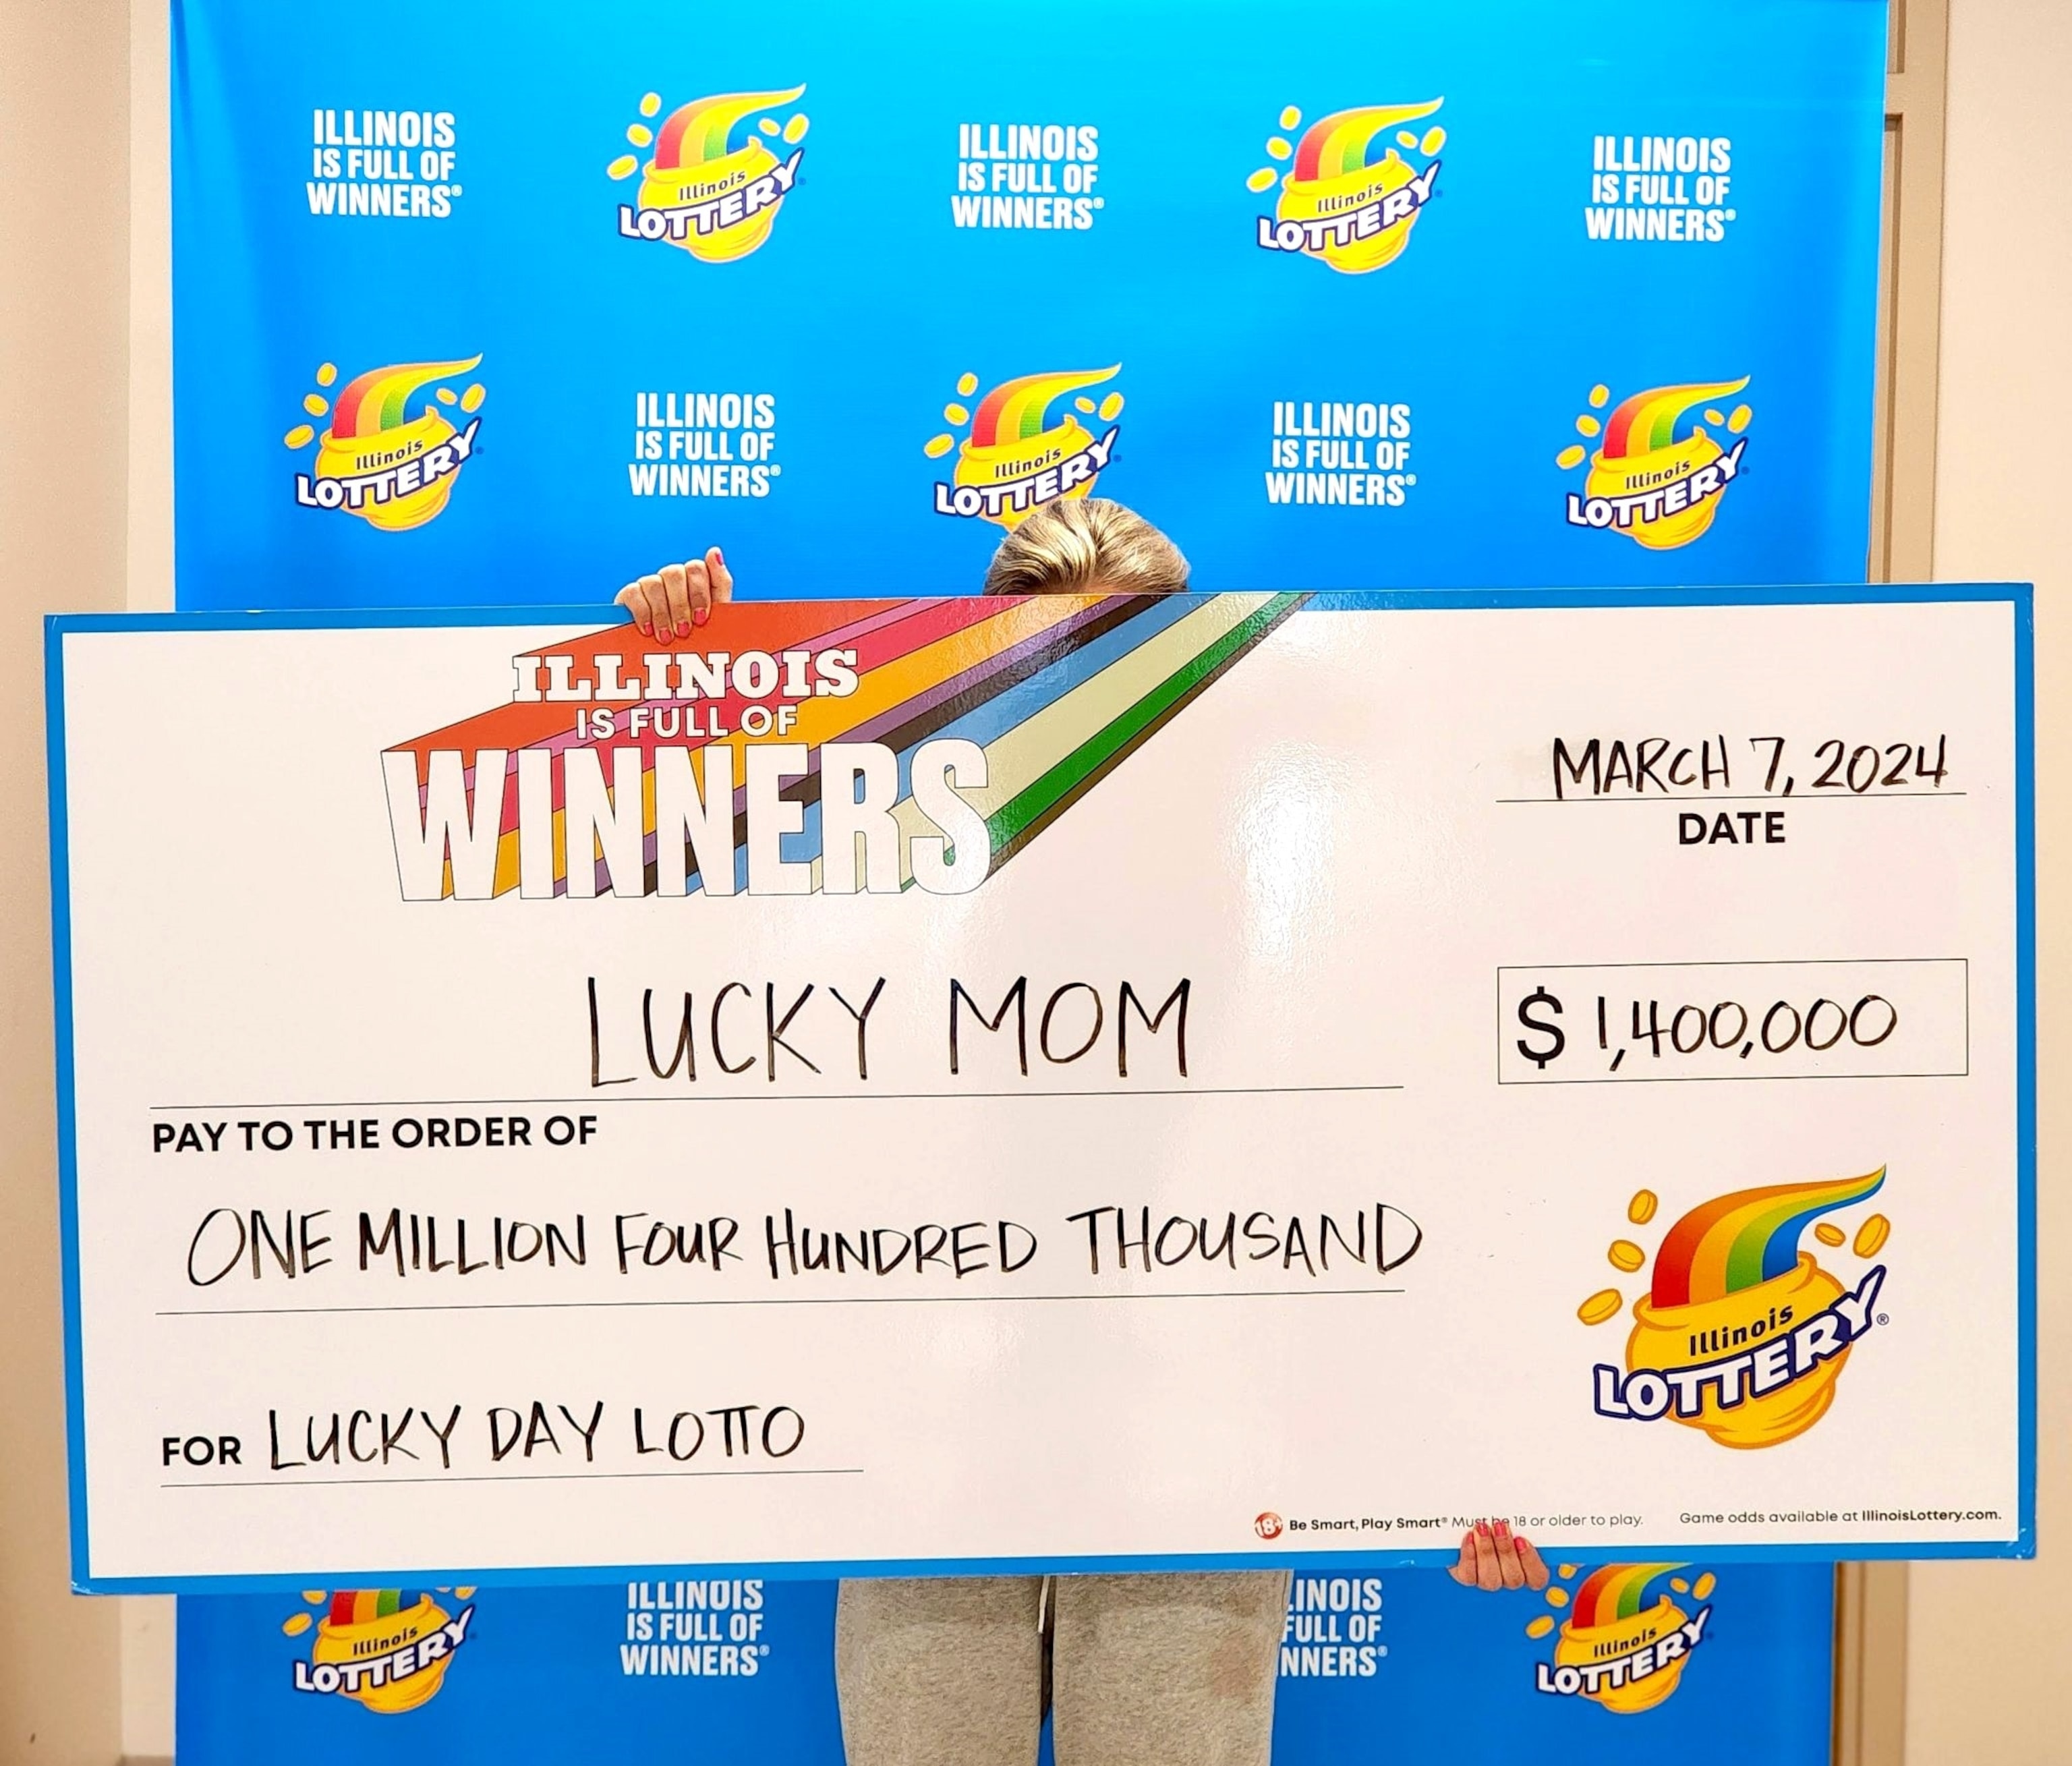 PHOTO: A mother won $1.4 million from the Illinois lottery using her kids' birthdays as winning numbers